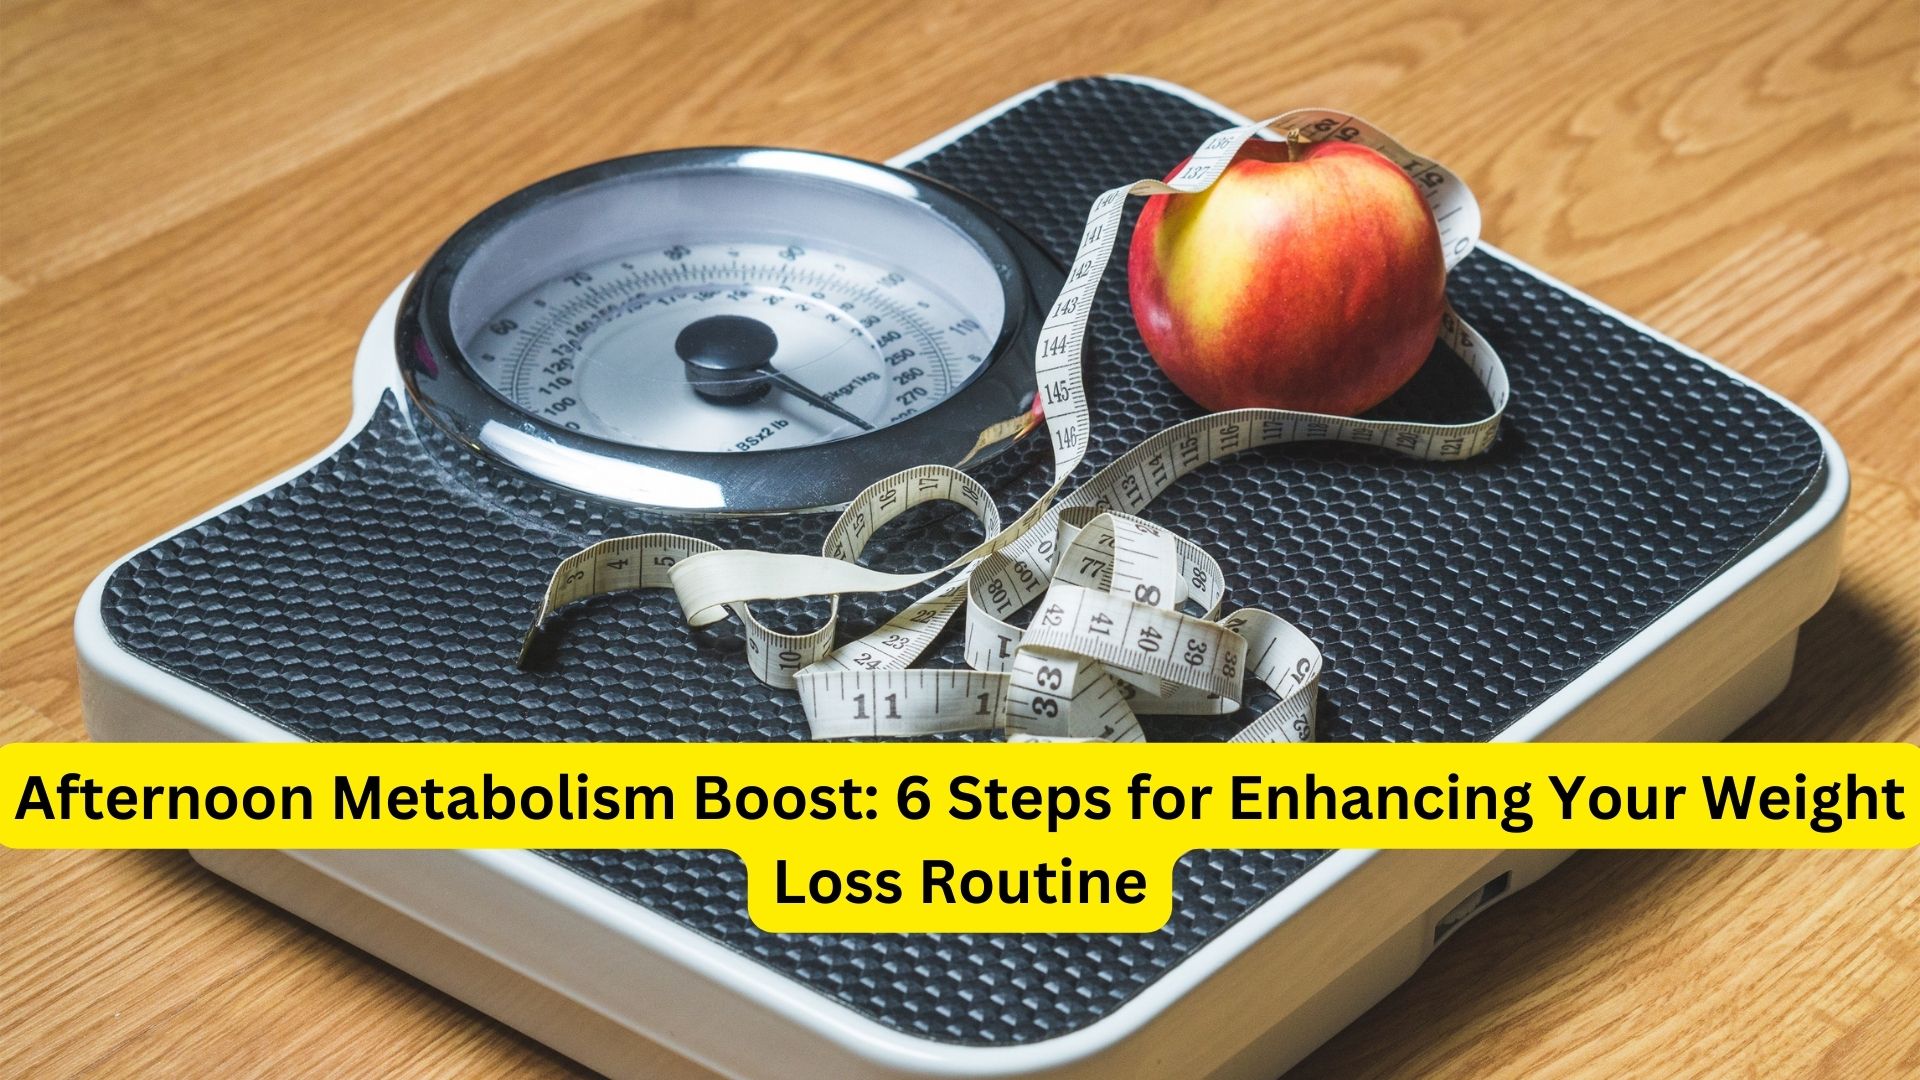 Afternoon Metabolism Boost: 6 Steps for Enhancing Your Weight Loss Routine